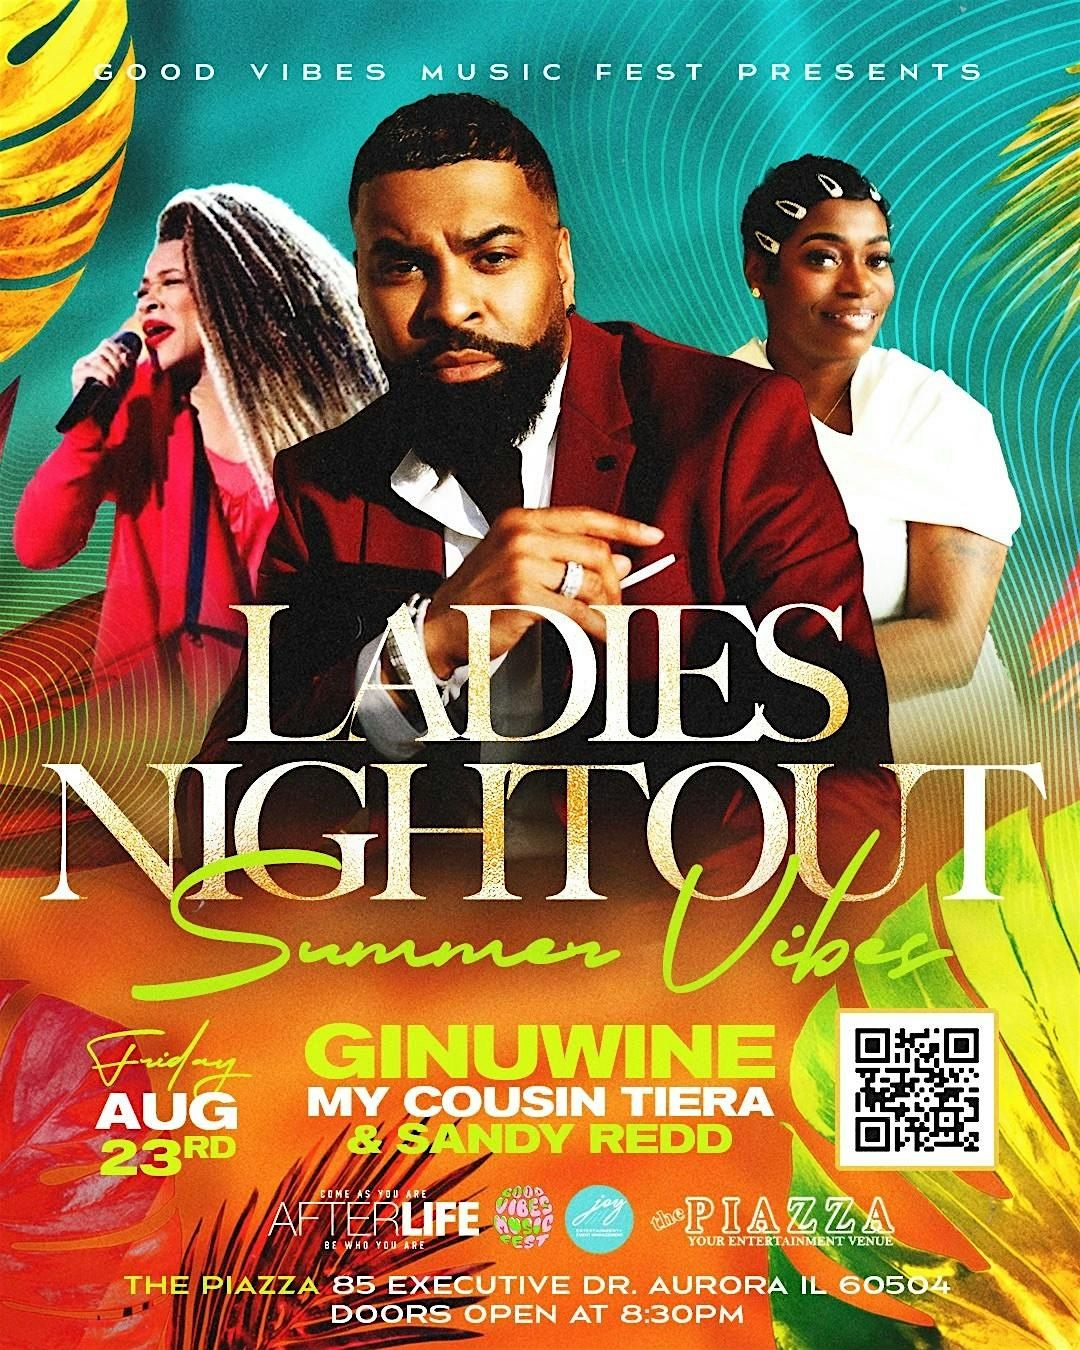 Ladies Night Out: Ginuwine, My Cousin Tiera, and Friends!